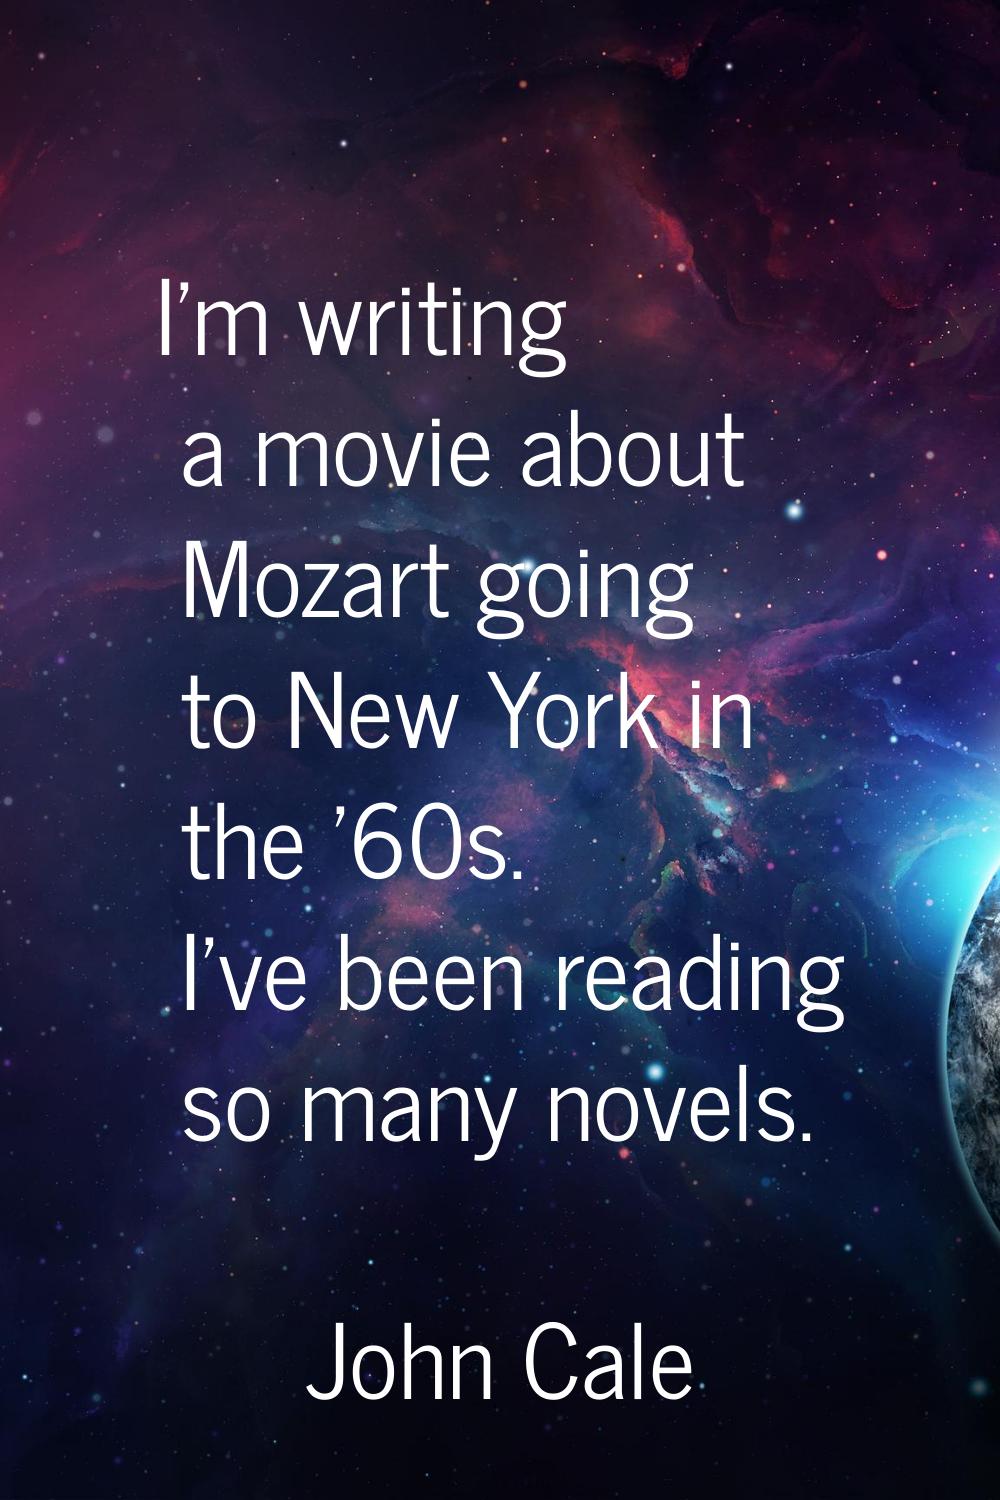 I'm writing a movie about Mozart going to New York in the '60s. I've been reading so many novels.